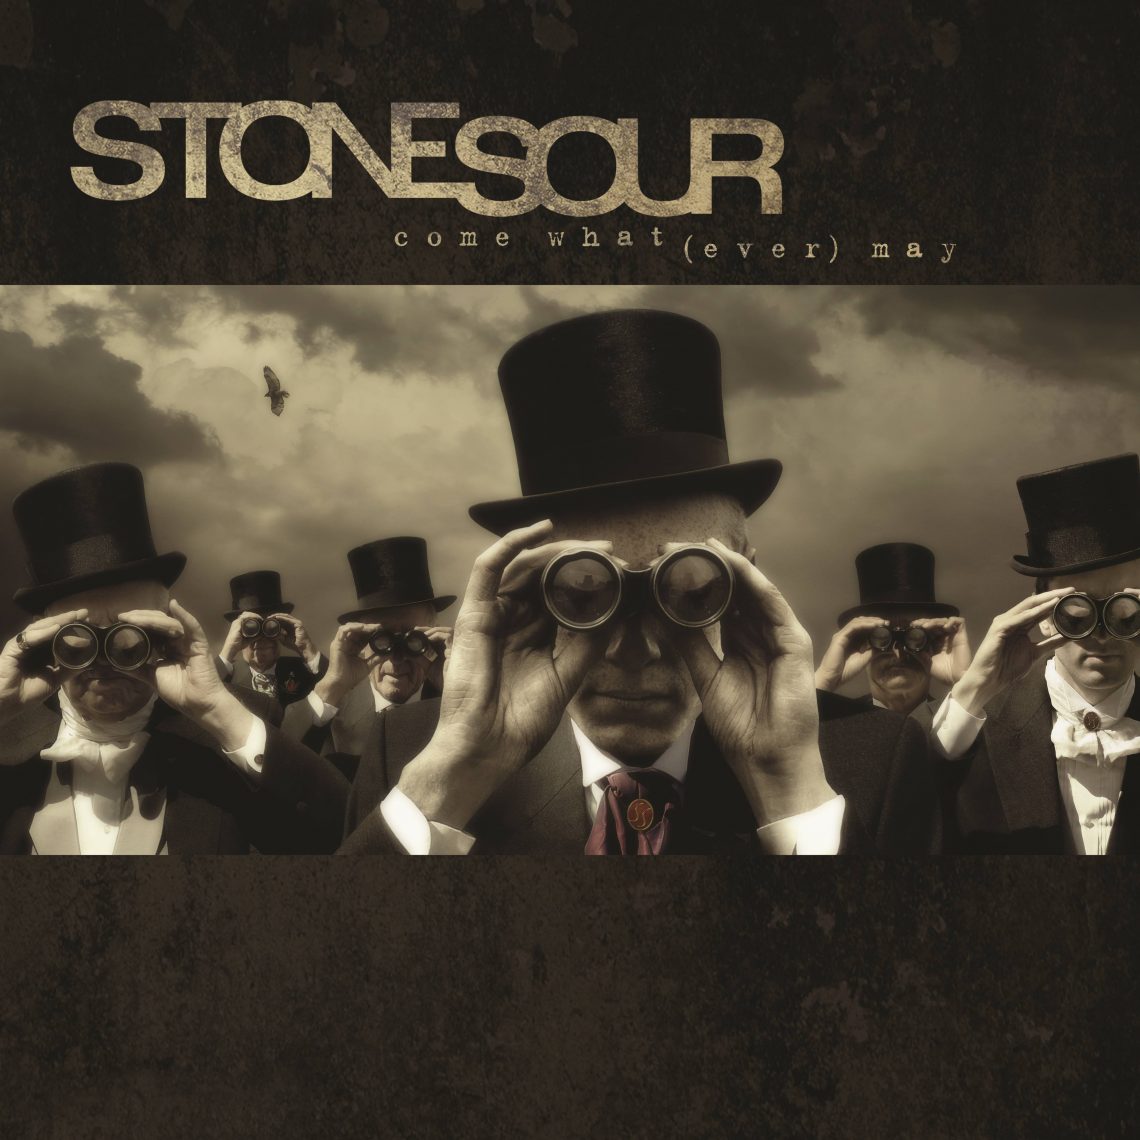 STONE SOUR issue 10th Anniversary edition of ‘Come What(ever) May